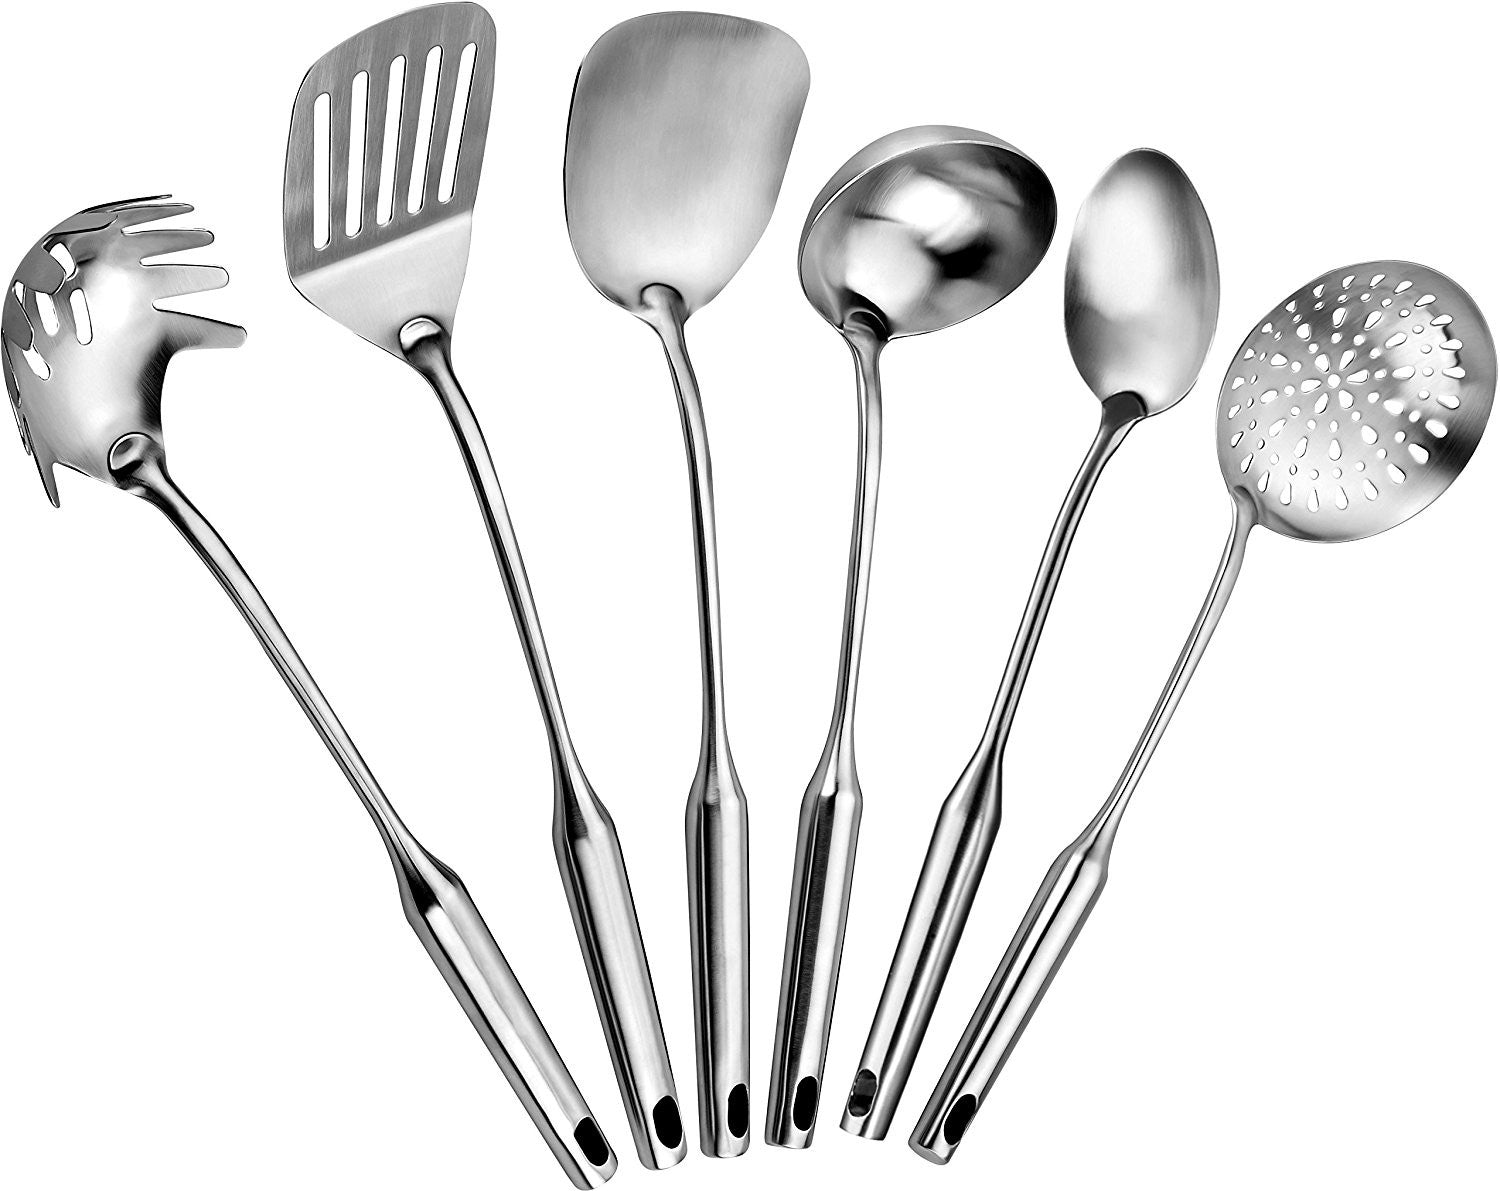 11 Materials of Kitchen Utensils: Which Is the Right One? (6 Tips)